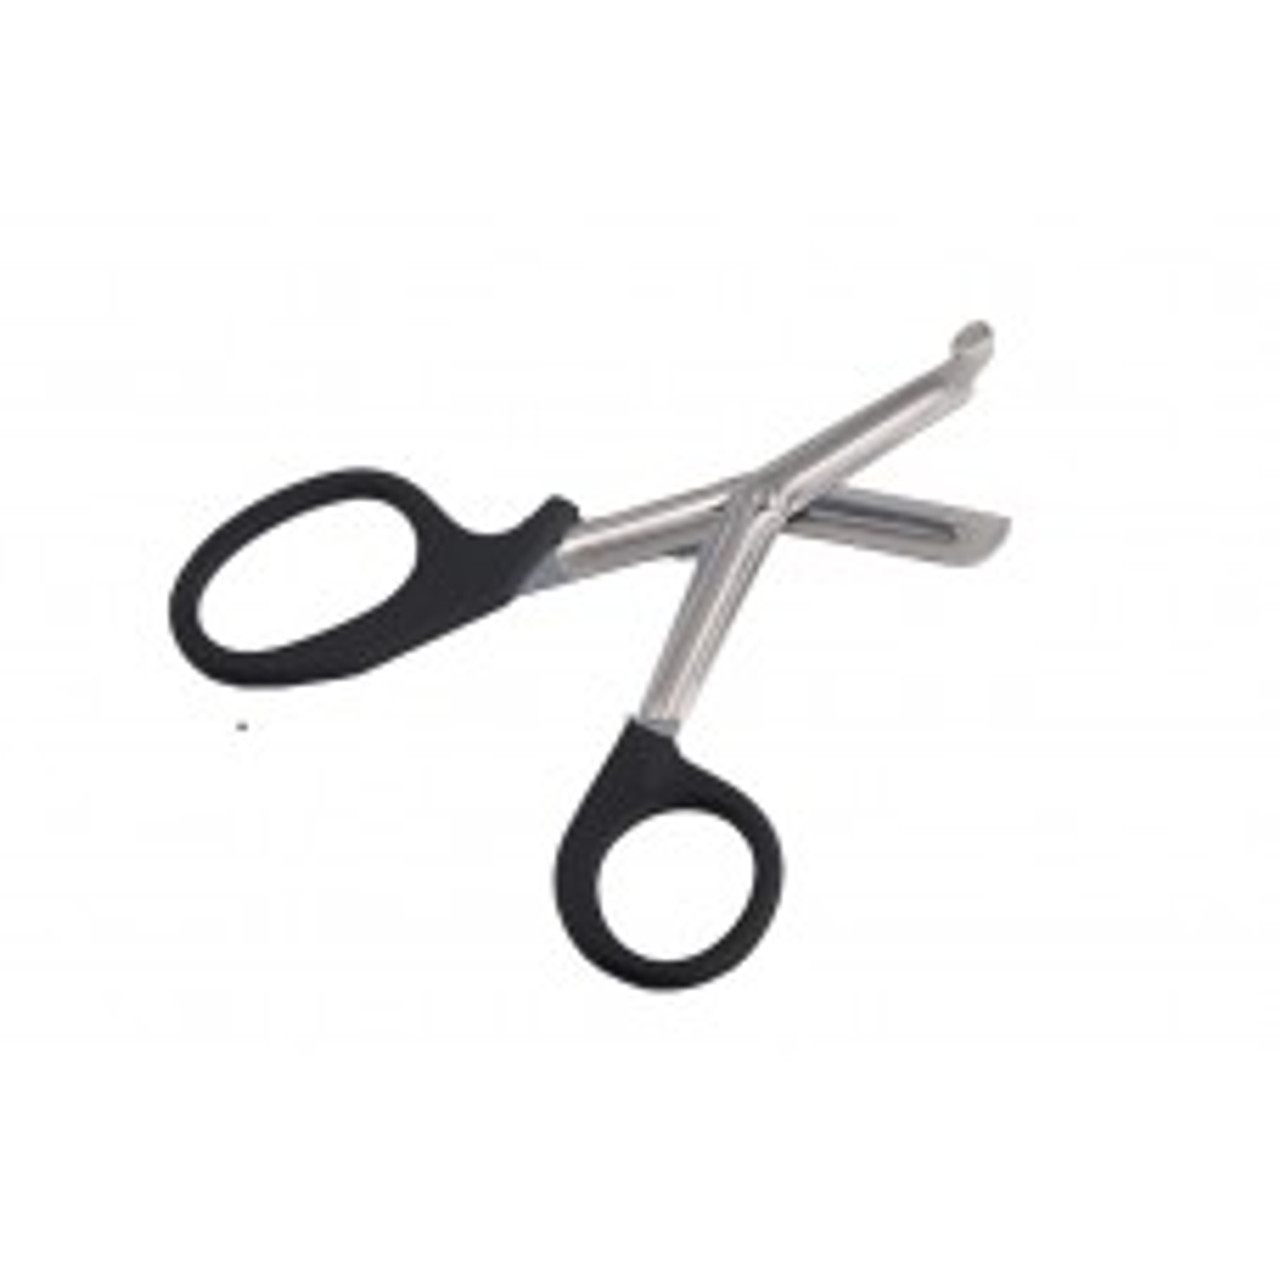 Medical Bandage Scissors, Small Lister Style, 5.5, case/600